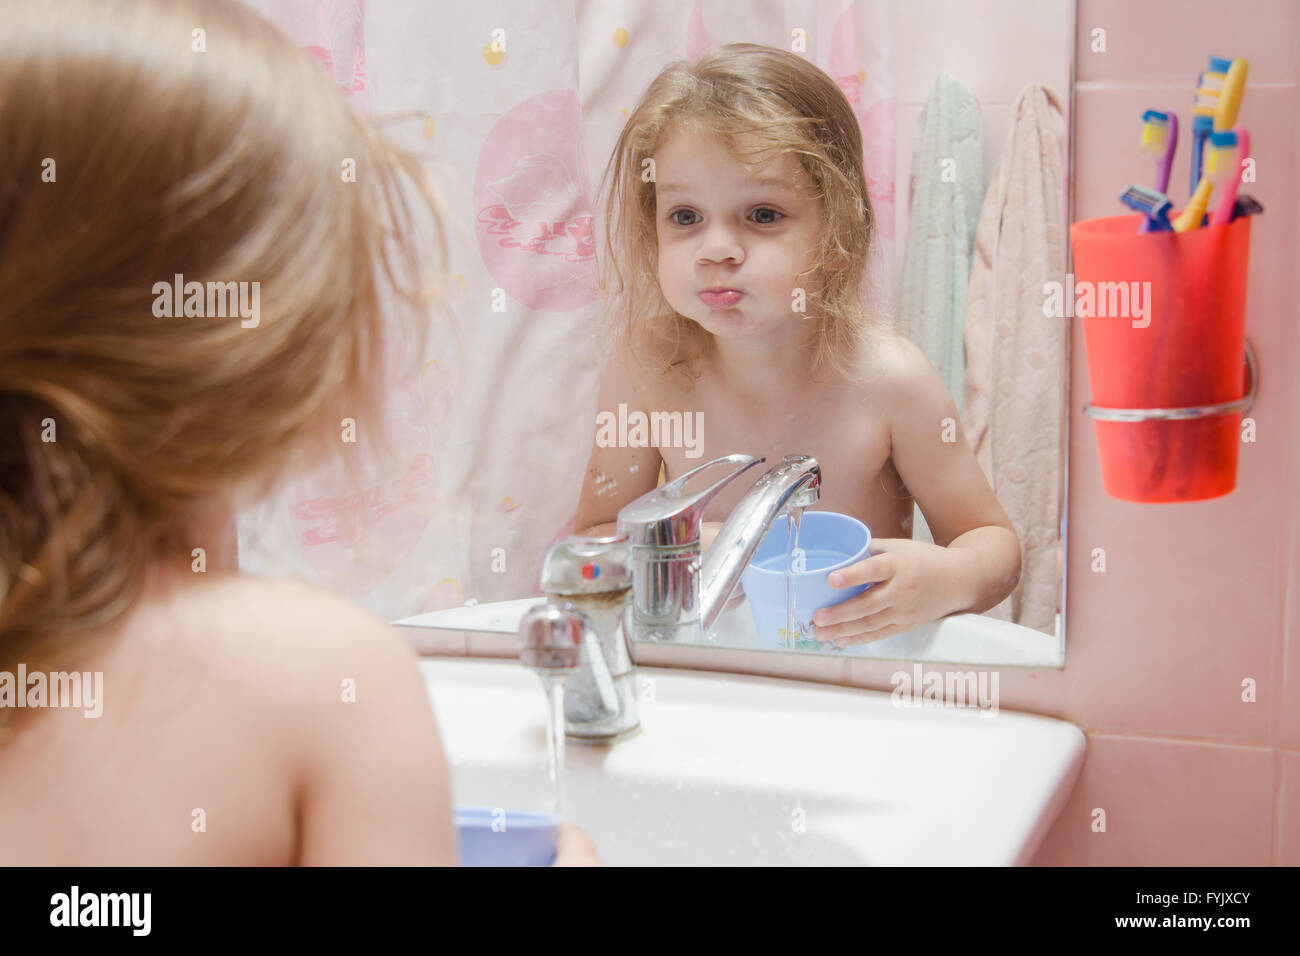 Three year girl to rinse your mouth after brushing teeth Stock Photo